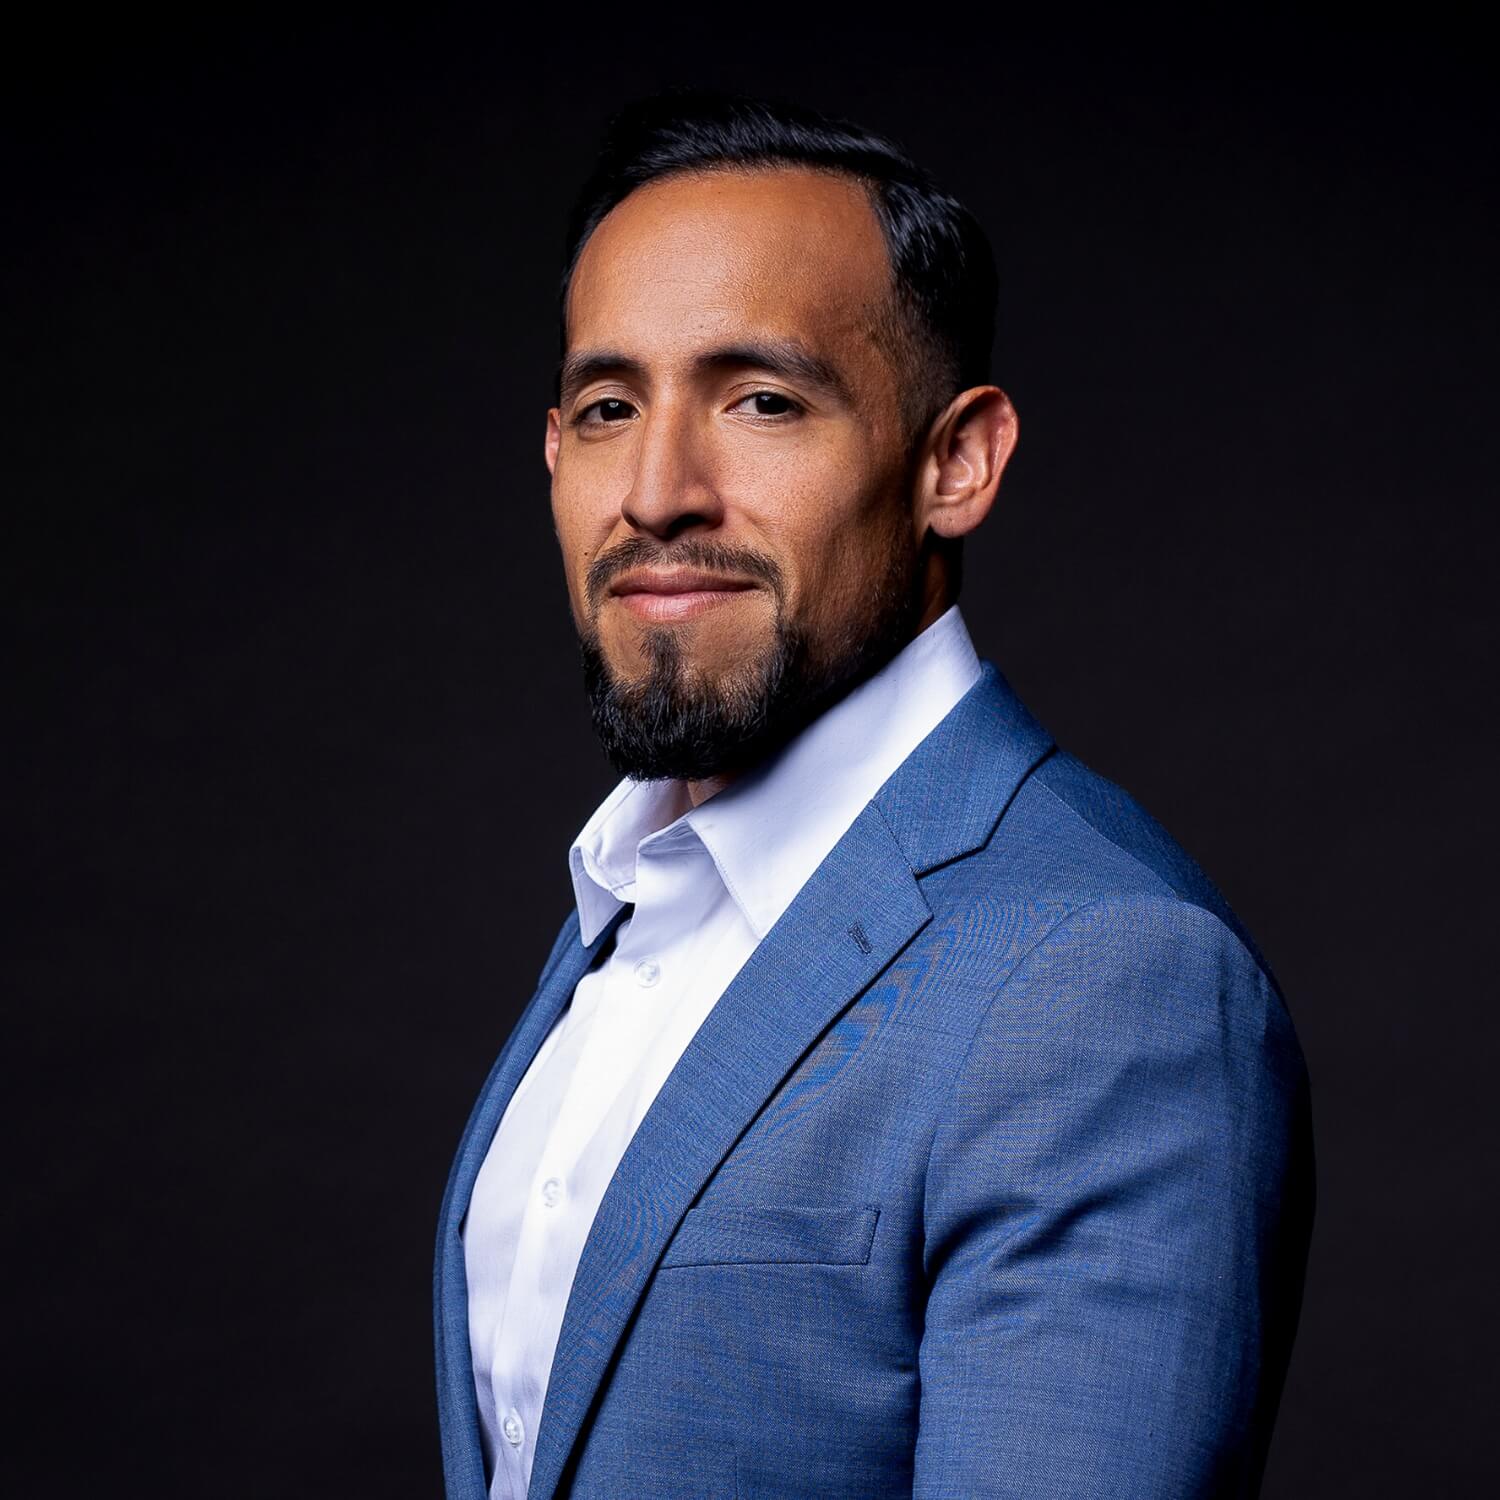 professional headshot example for male fitness coach